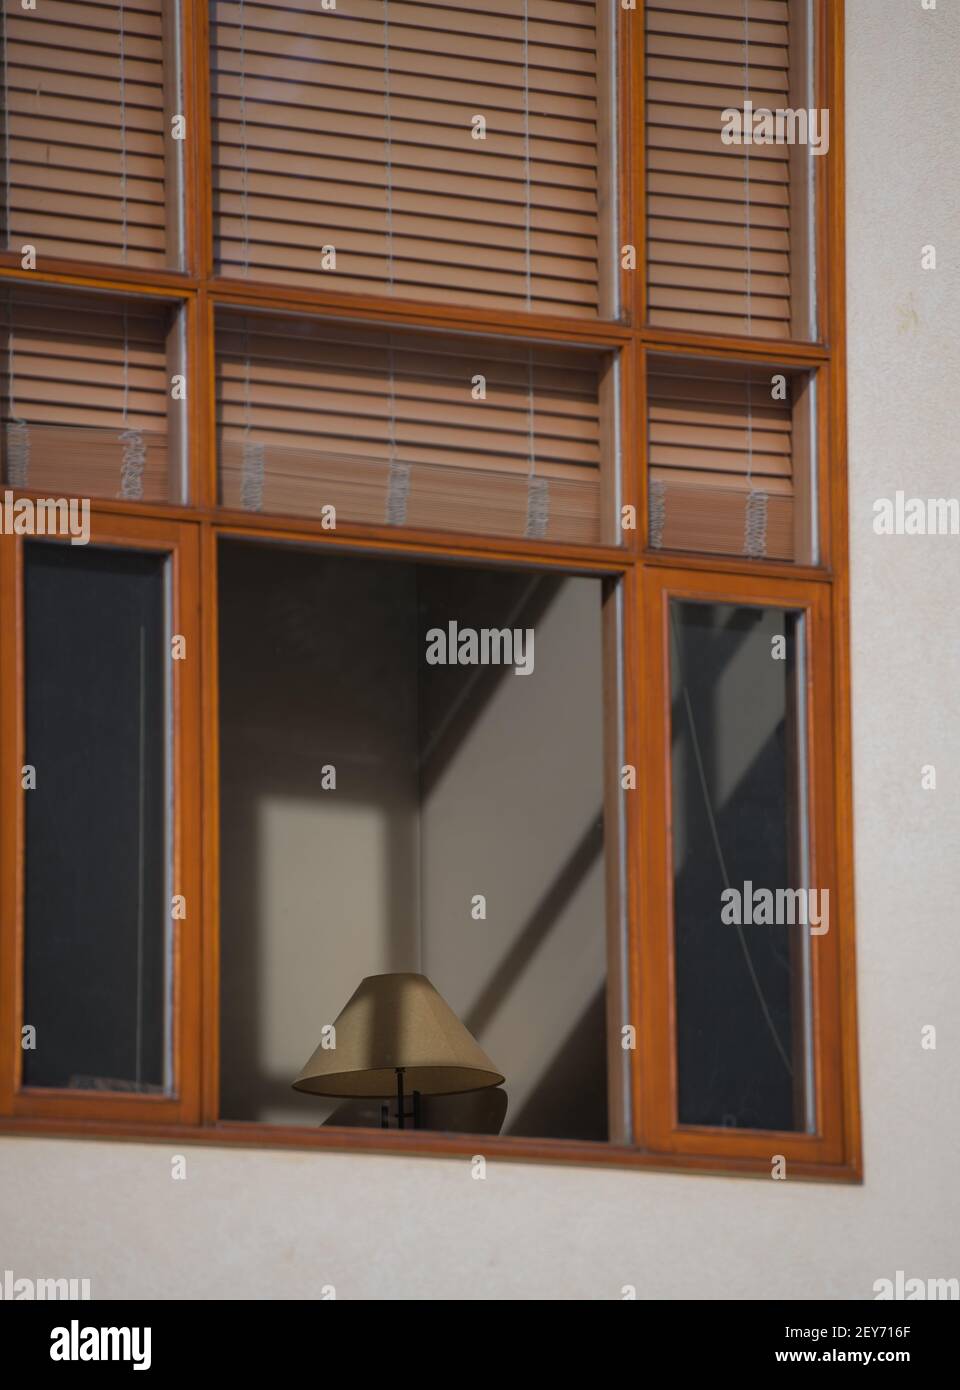 brown window blinds or shades blocking light coming through exterior wood framed home window light casting shadows on onterior wall sof home and lamp Stock Photo